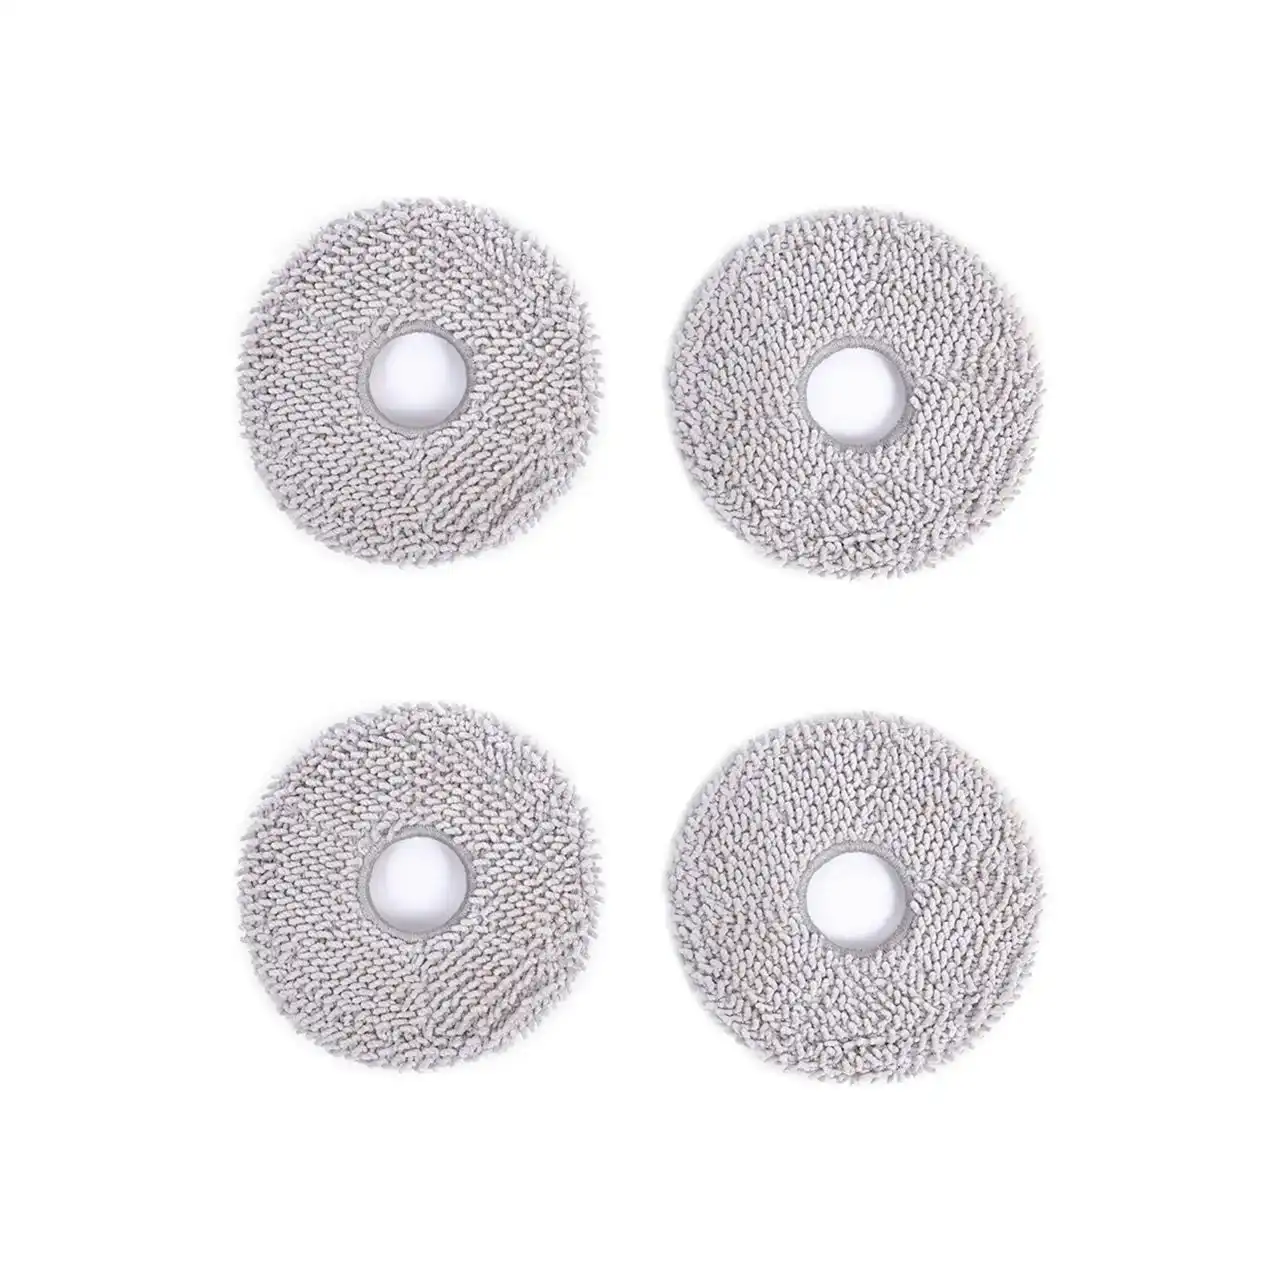 Ecovacs Deebot X1/x2/t20 Washable Mopping Pads